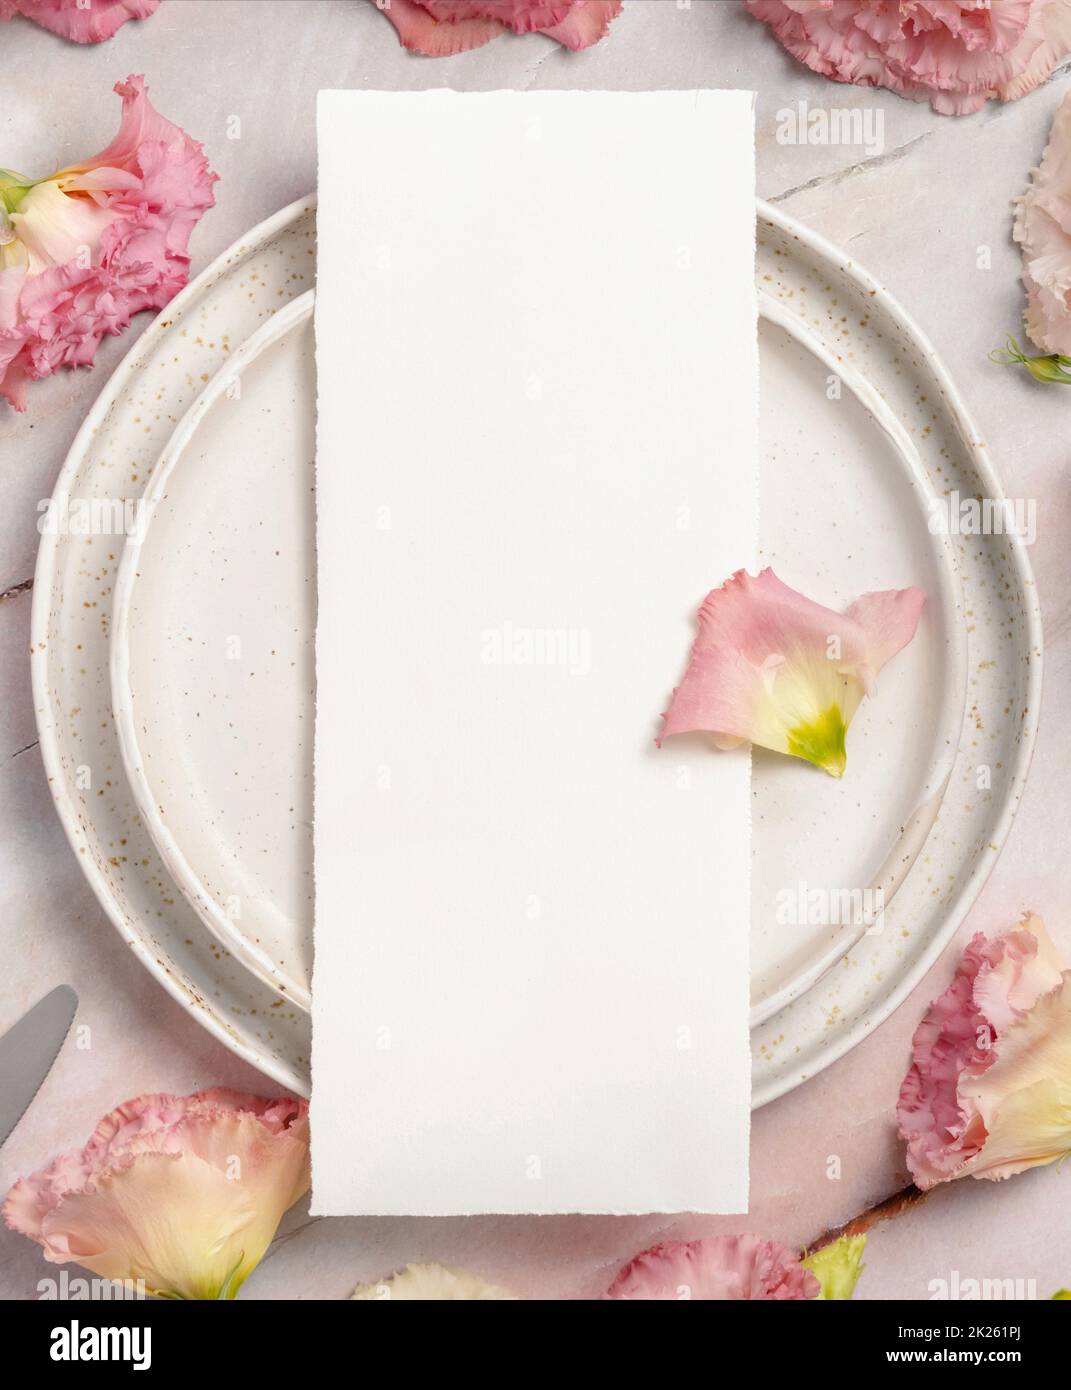 Wedding menu laying on a ceramic plate on a marble table Stock Photo